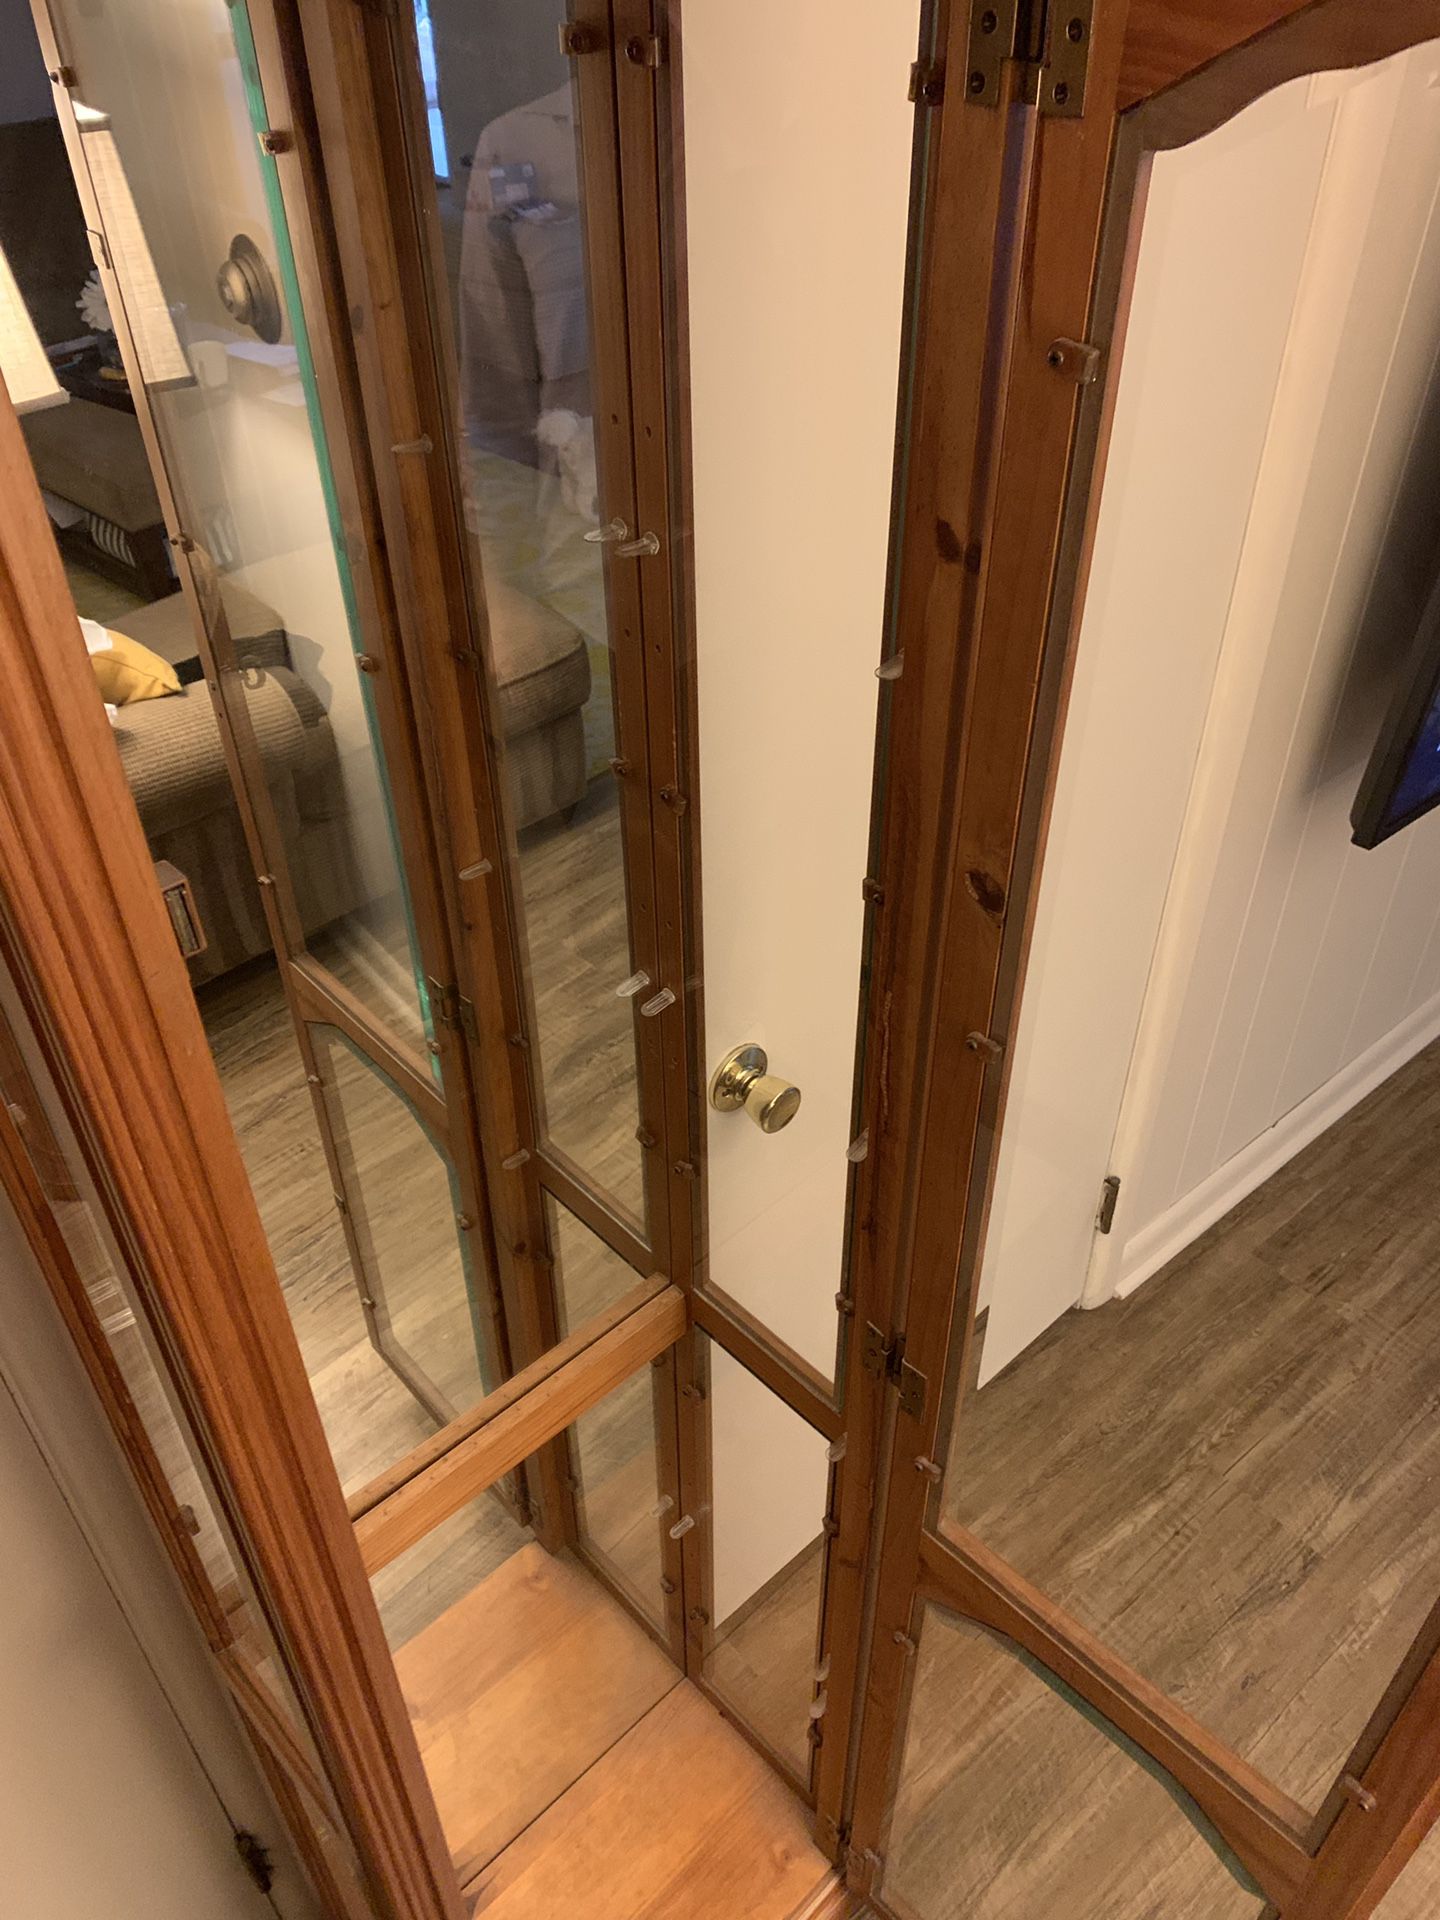 China Closet - Wood with Mirror and light